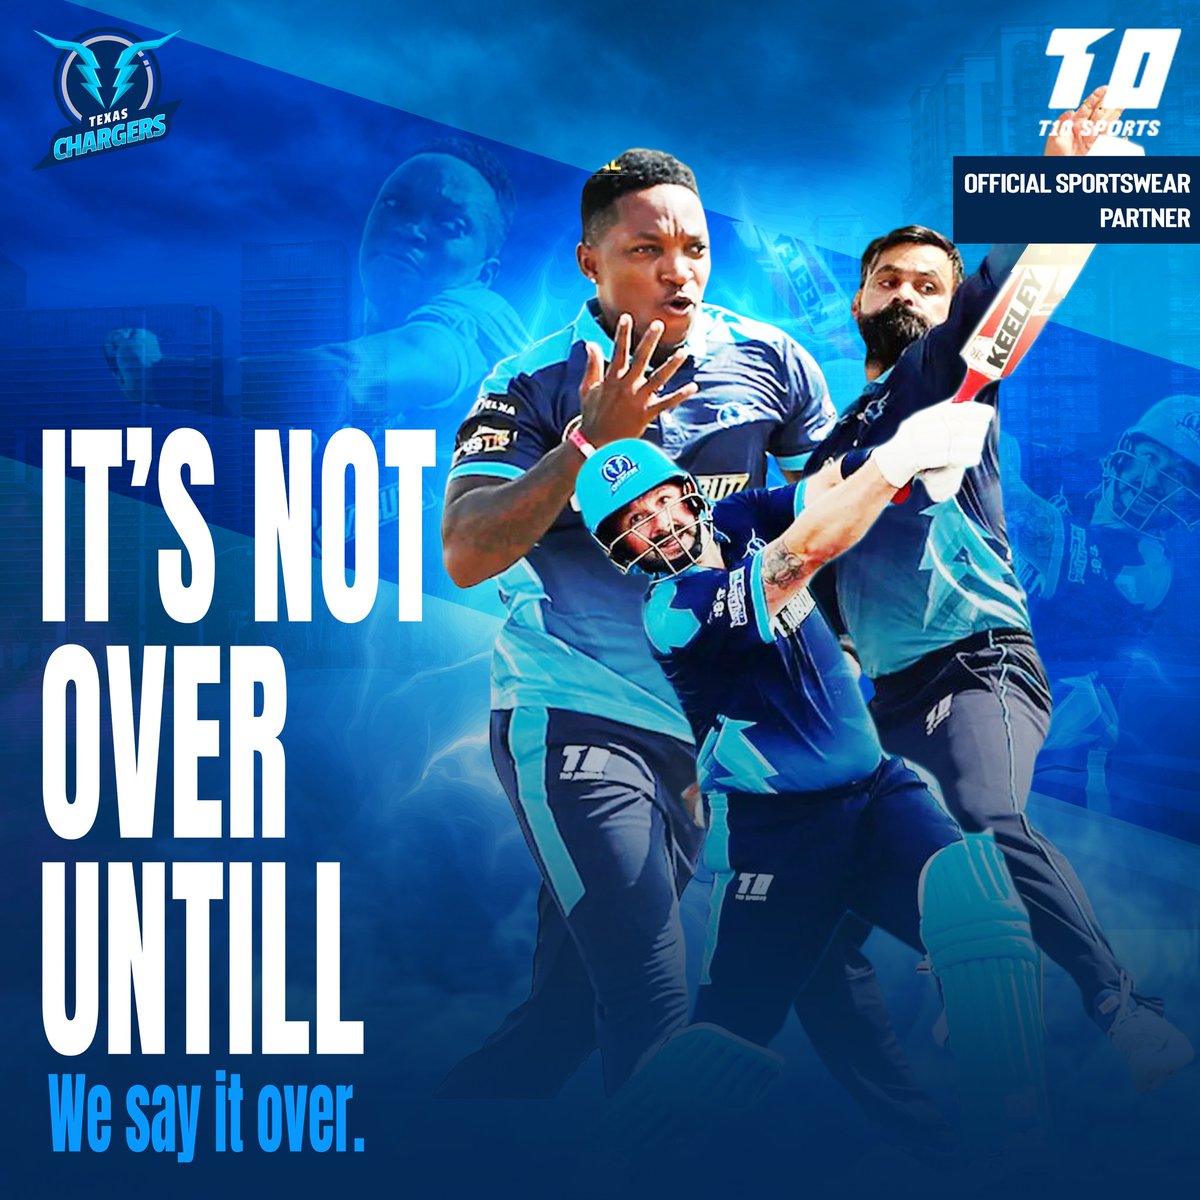 Chargers, amp up! ⚡⚡

We are not done yet. 😤 💪

It’s now or never. Let’s go Chargers! ⚡💪

T10 Sports - Official Sportswear Partner.

@TChargerst10

#TaxasChargers #USACricket #USMastersT10 #ChargingtoVictory #Cricket #USAMasters #Sports #T10 #T10sports